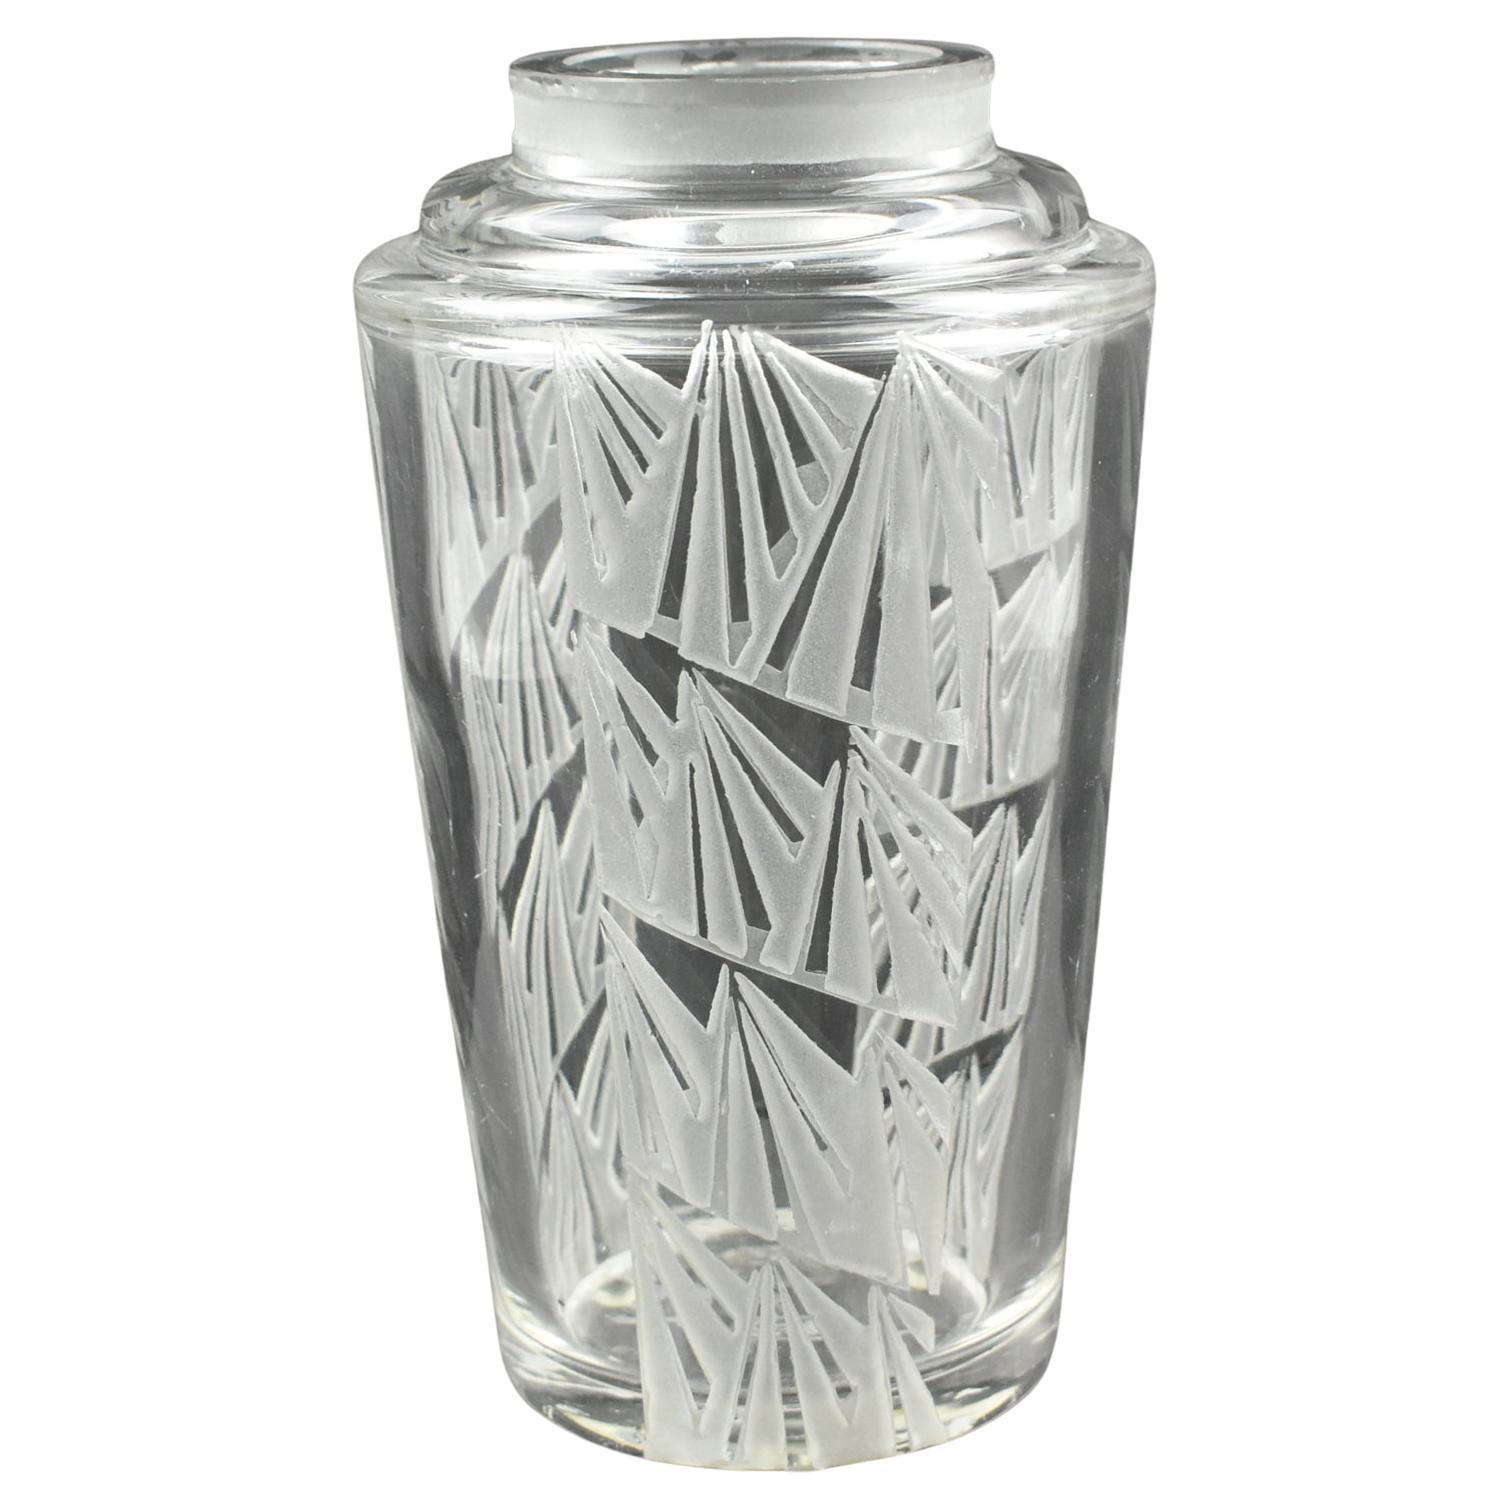 Jean Luce Art Deco Geometric Etched Glass Vase, France 1930s For Sale